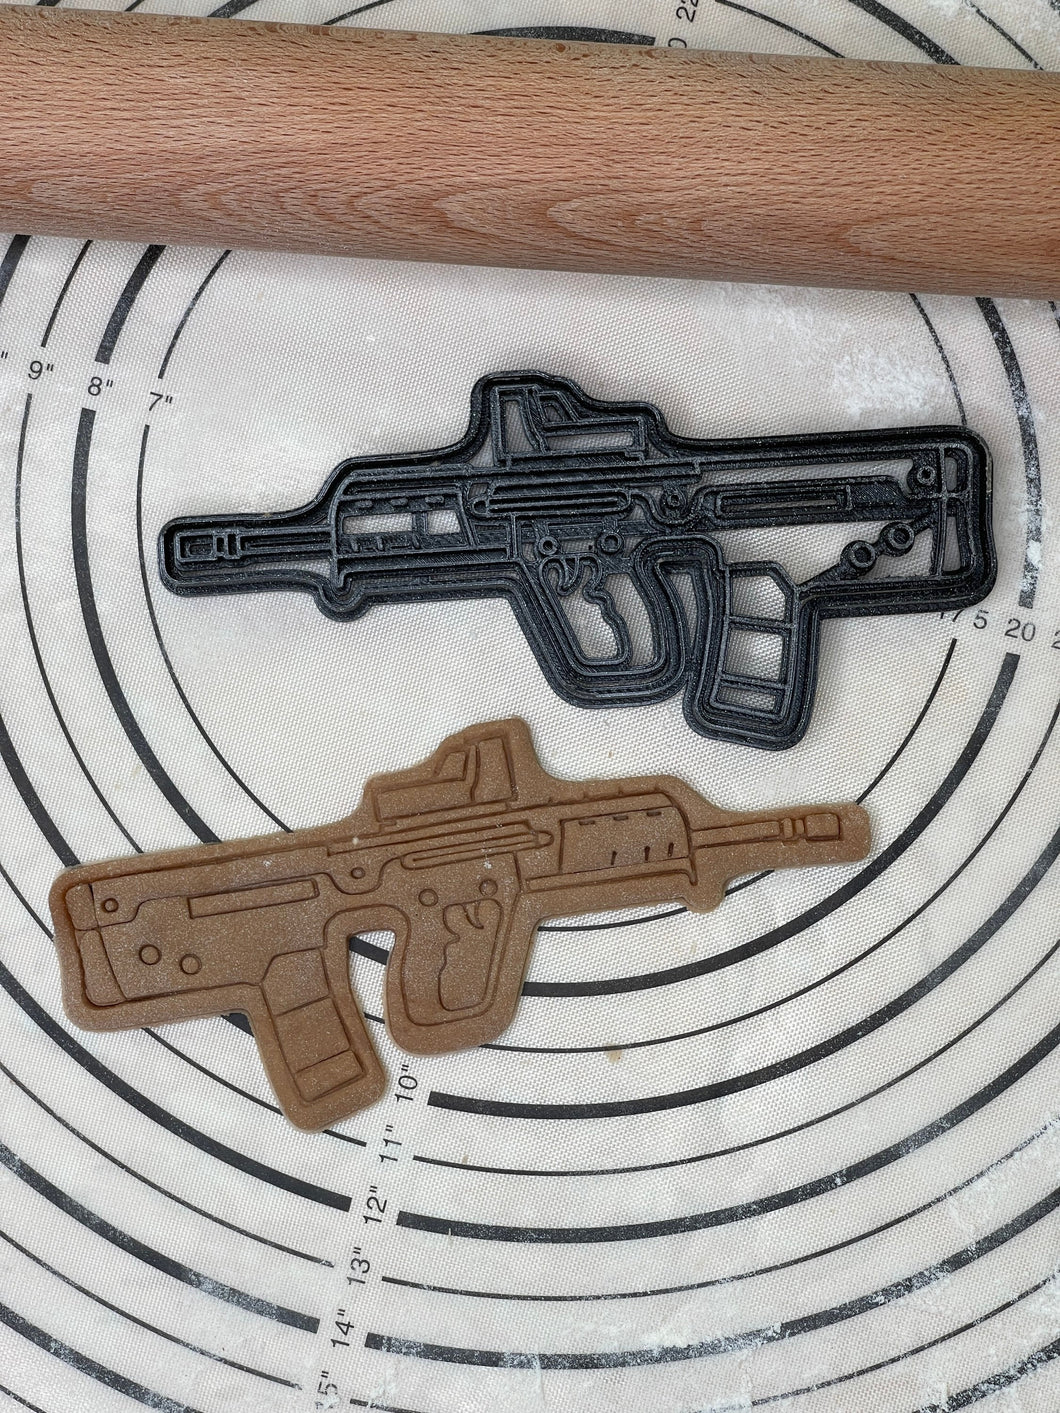 IWI Tavor x95 Cookie Cutter & Mold 3.5” Produced by 3D Kitchen Art